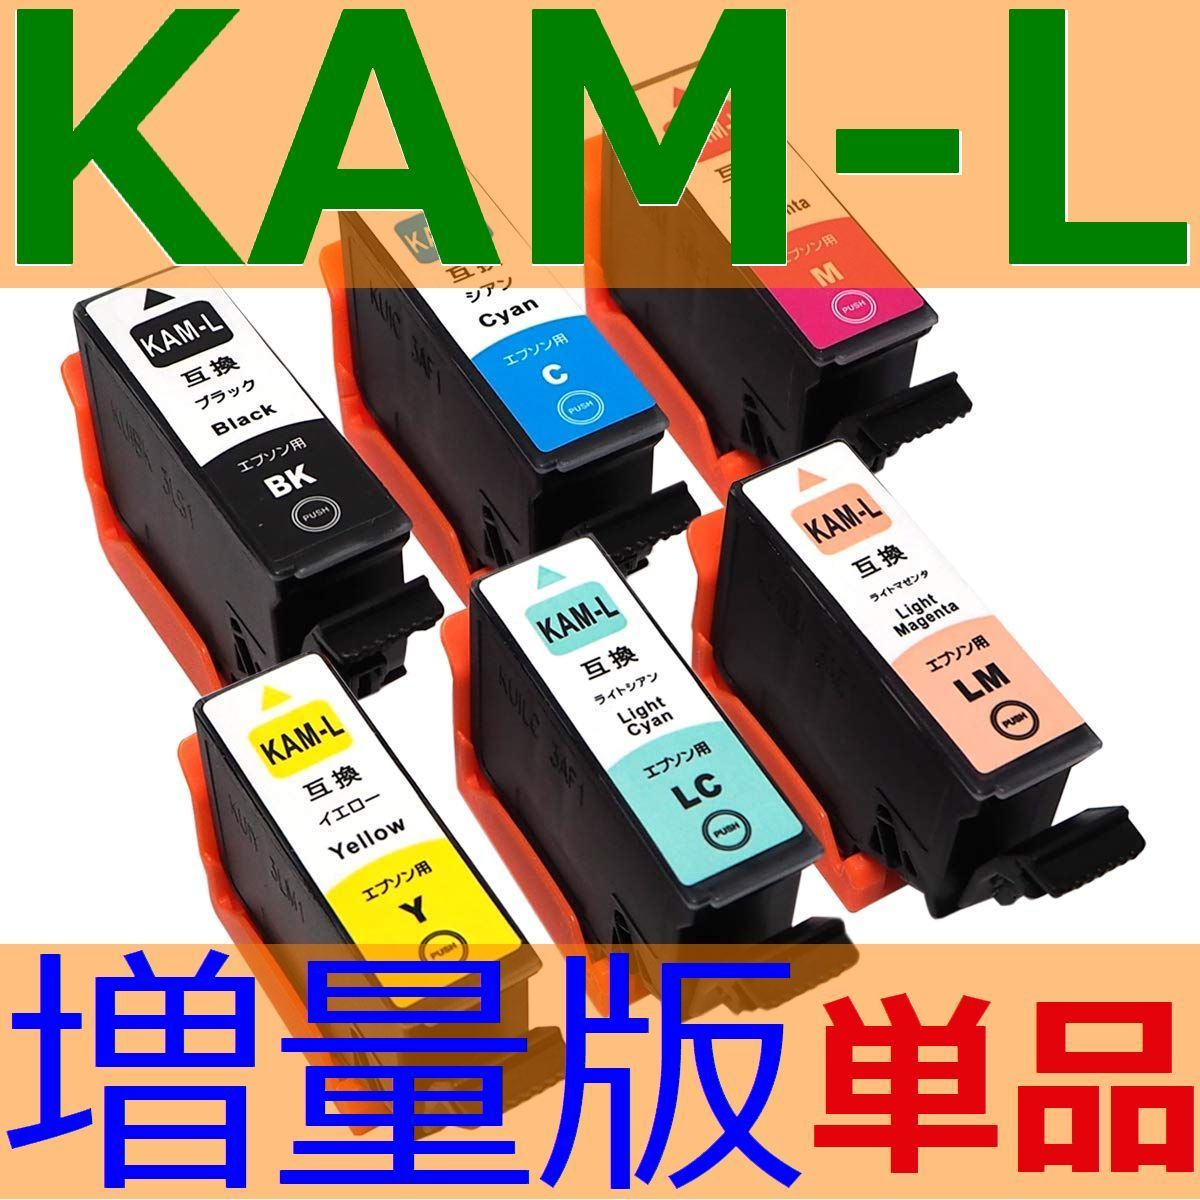 Epson Kam Interchangeable Ink Turtle Increase Amount Version Single Goods Ic Chip Attaching Epson Ep 1ab Ep 1aw Ep 1an Ep 1ar Kam Bk L Kam C L Kam M L Kam Y L Real Yahoo Auction Salling